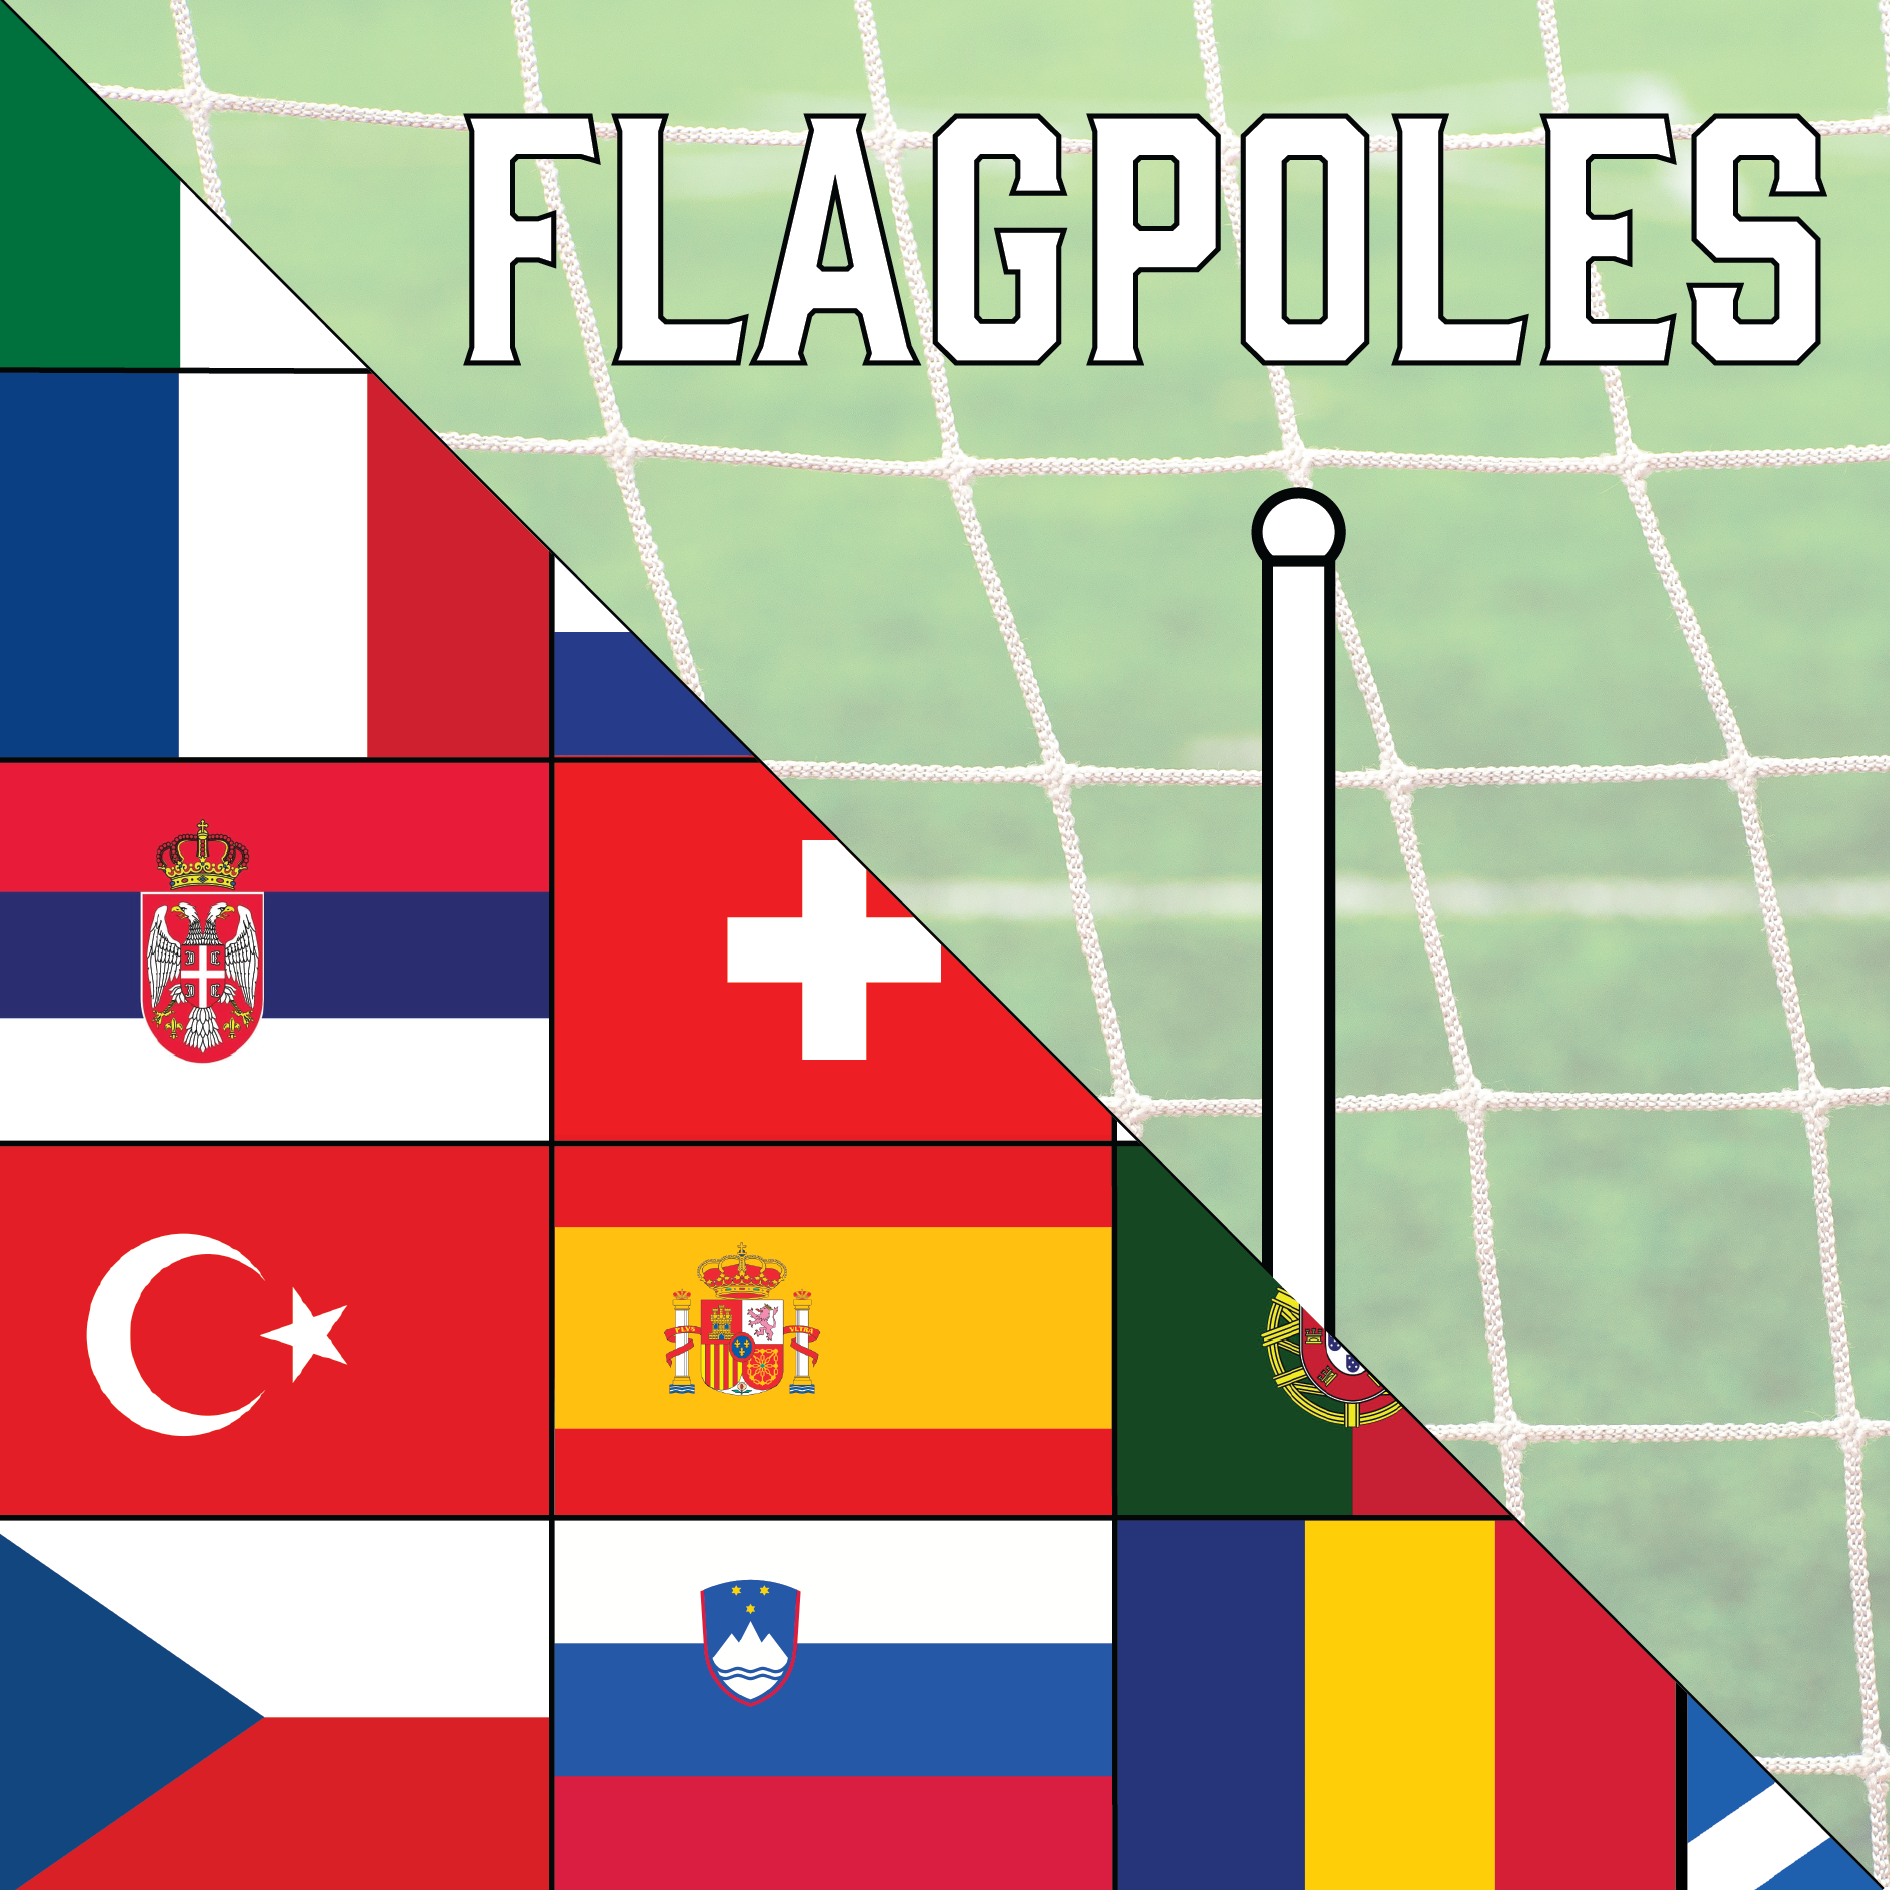 Supporters flagpole kits